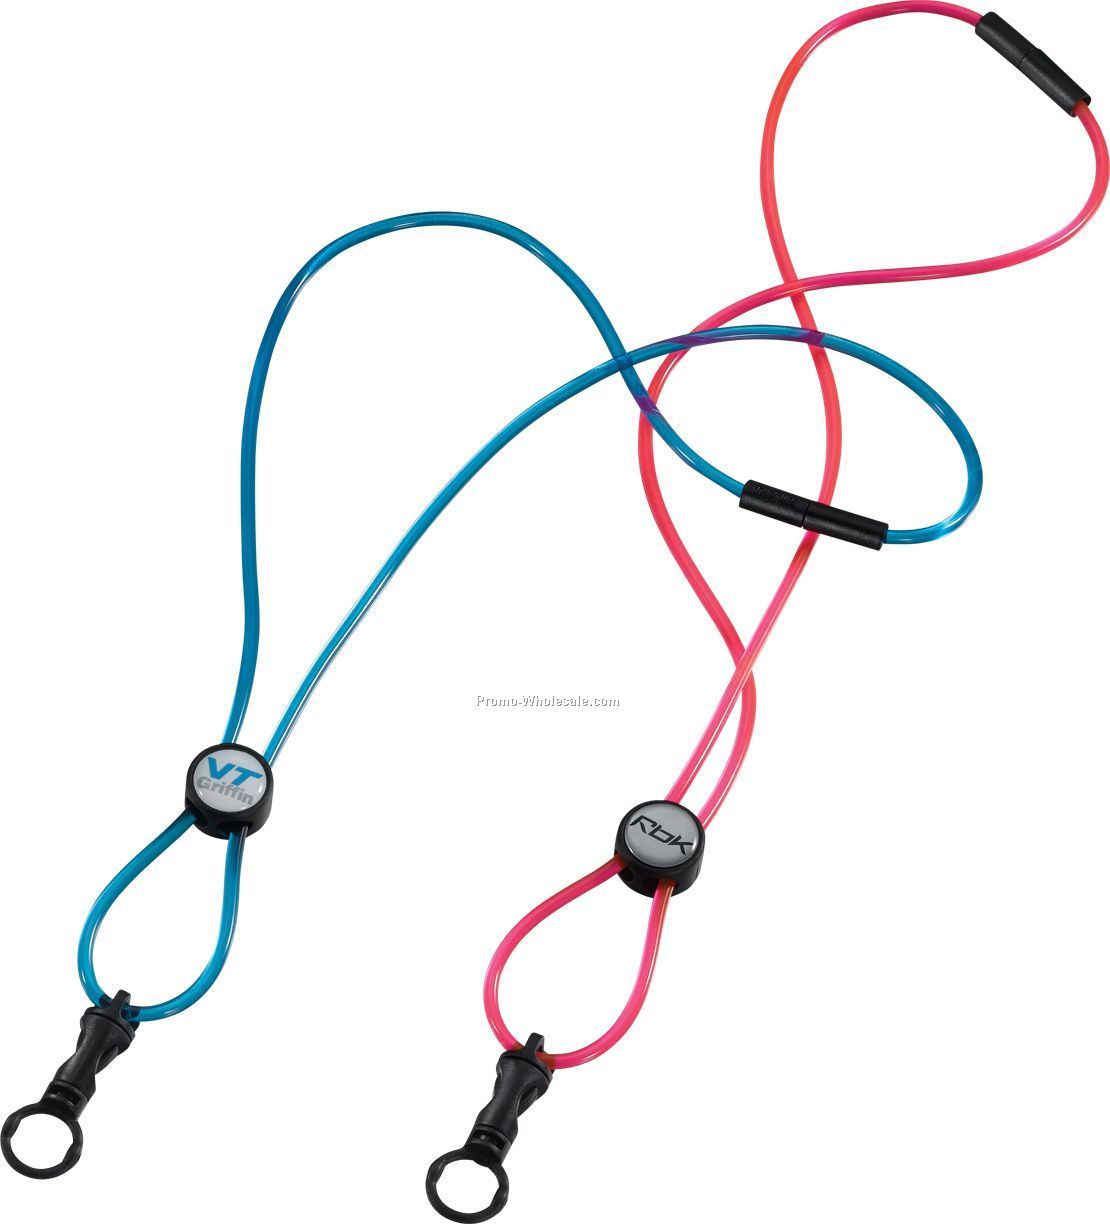 3/16" Transparent Cord Lanyard With Domed Locking Slider